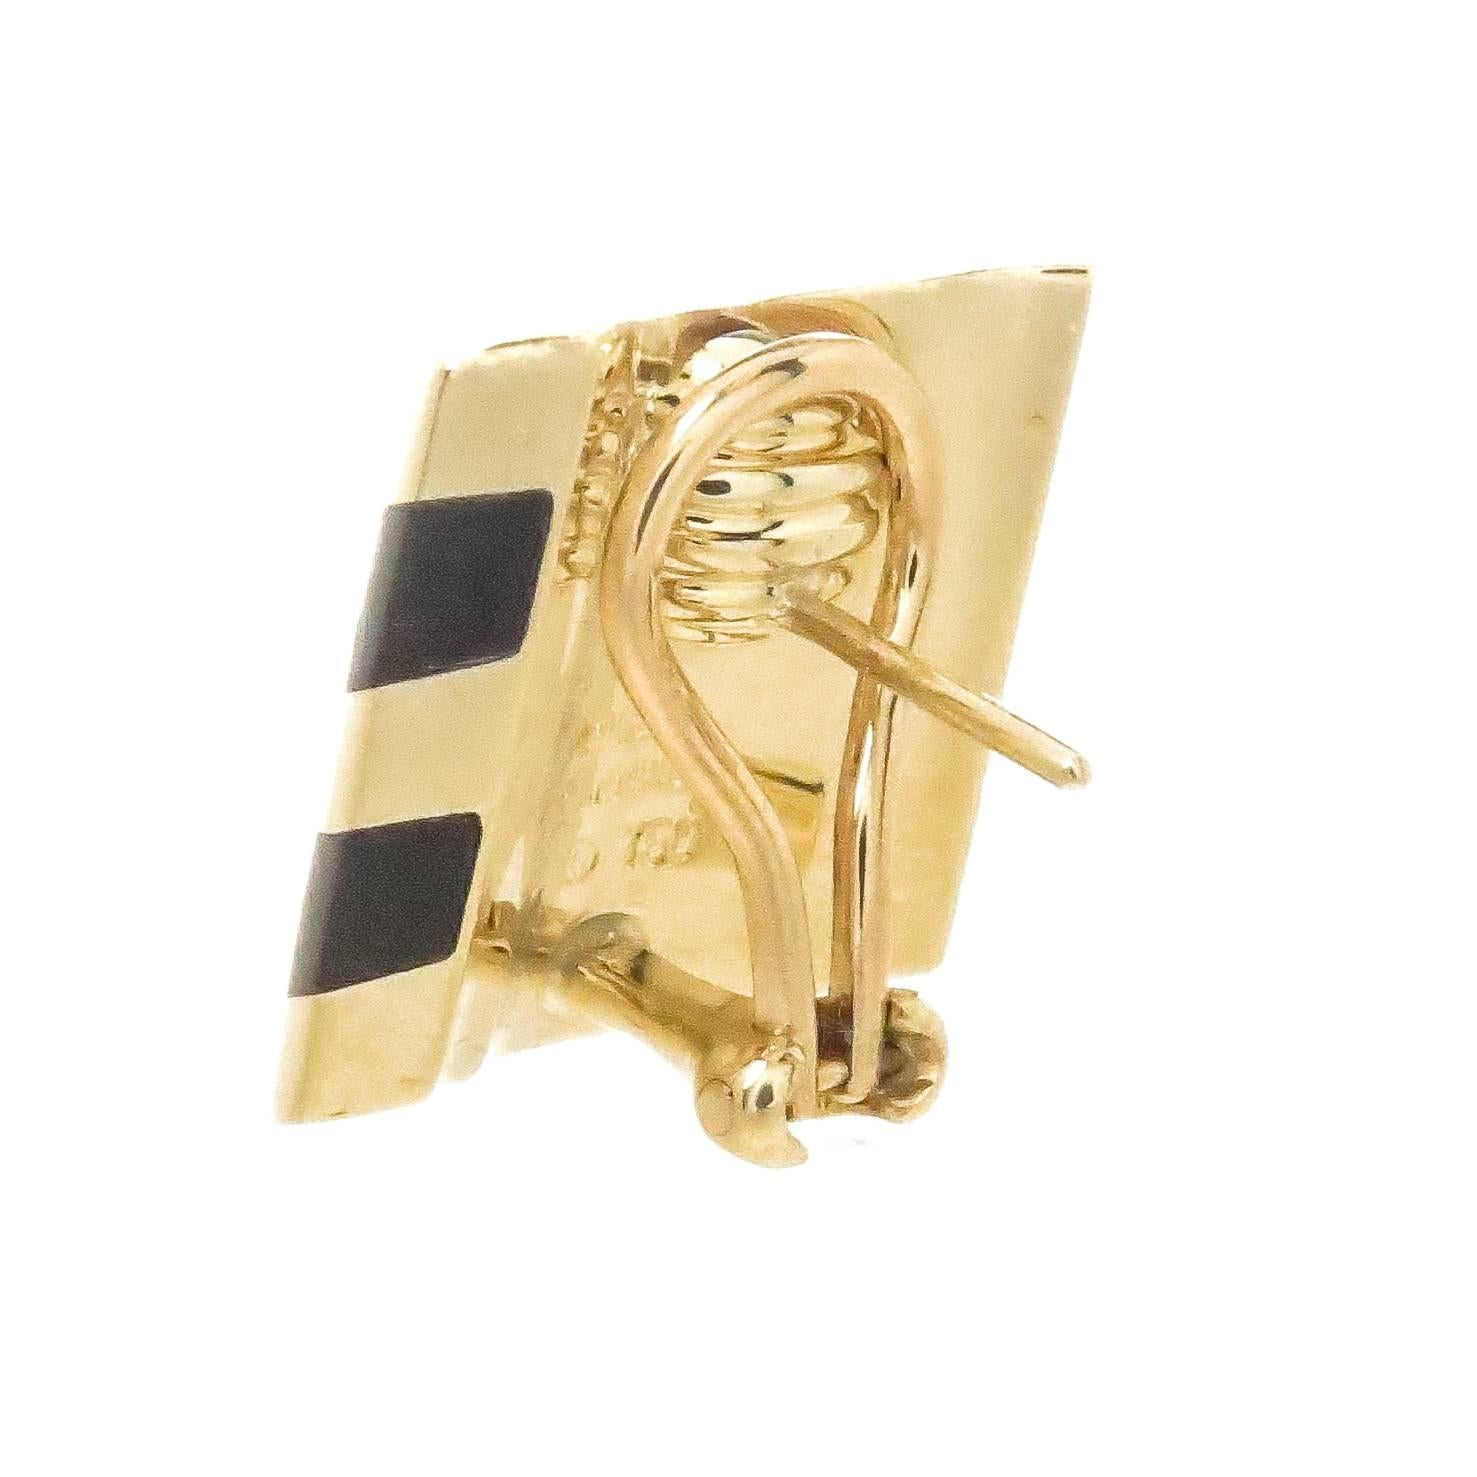 Circa 1980s Angela Cummings 18K yellow Gold Earrings, having a wave design the earrings measure 3/4 X 3/4 inch, 2 stripes of inlayed Black Onyx stone. Omega clip backs with a post.